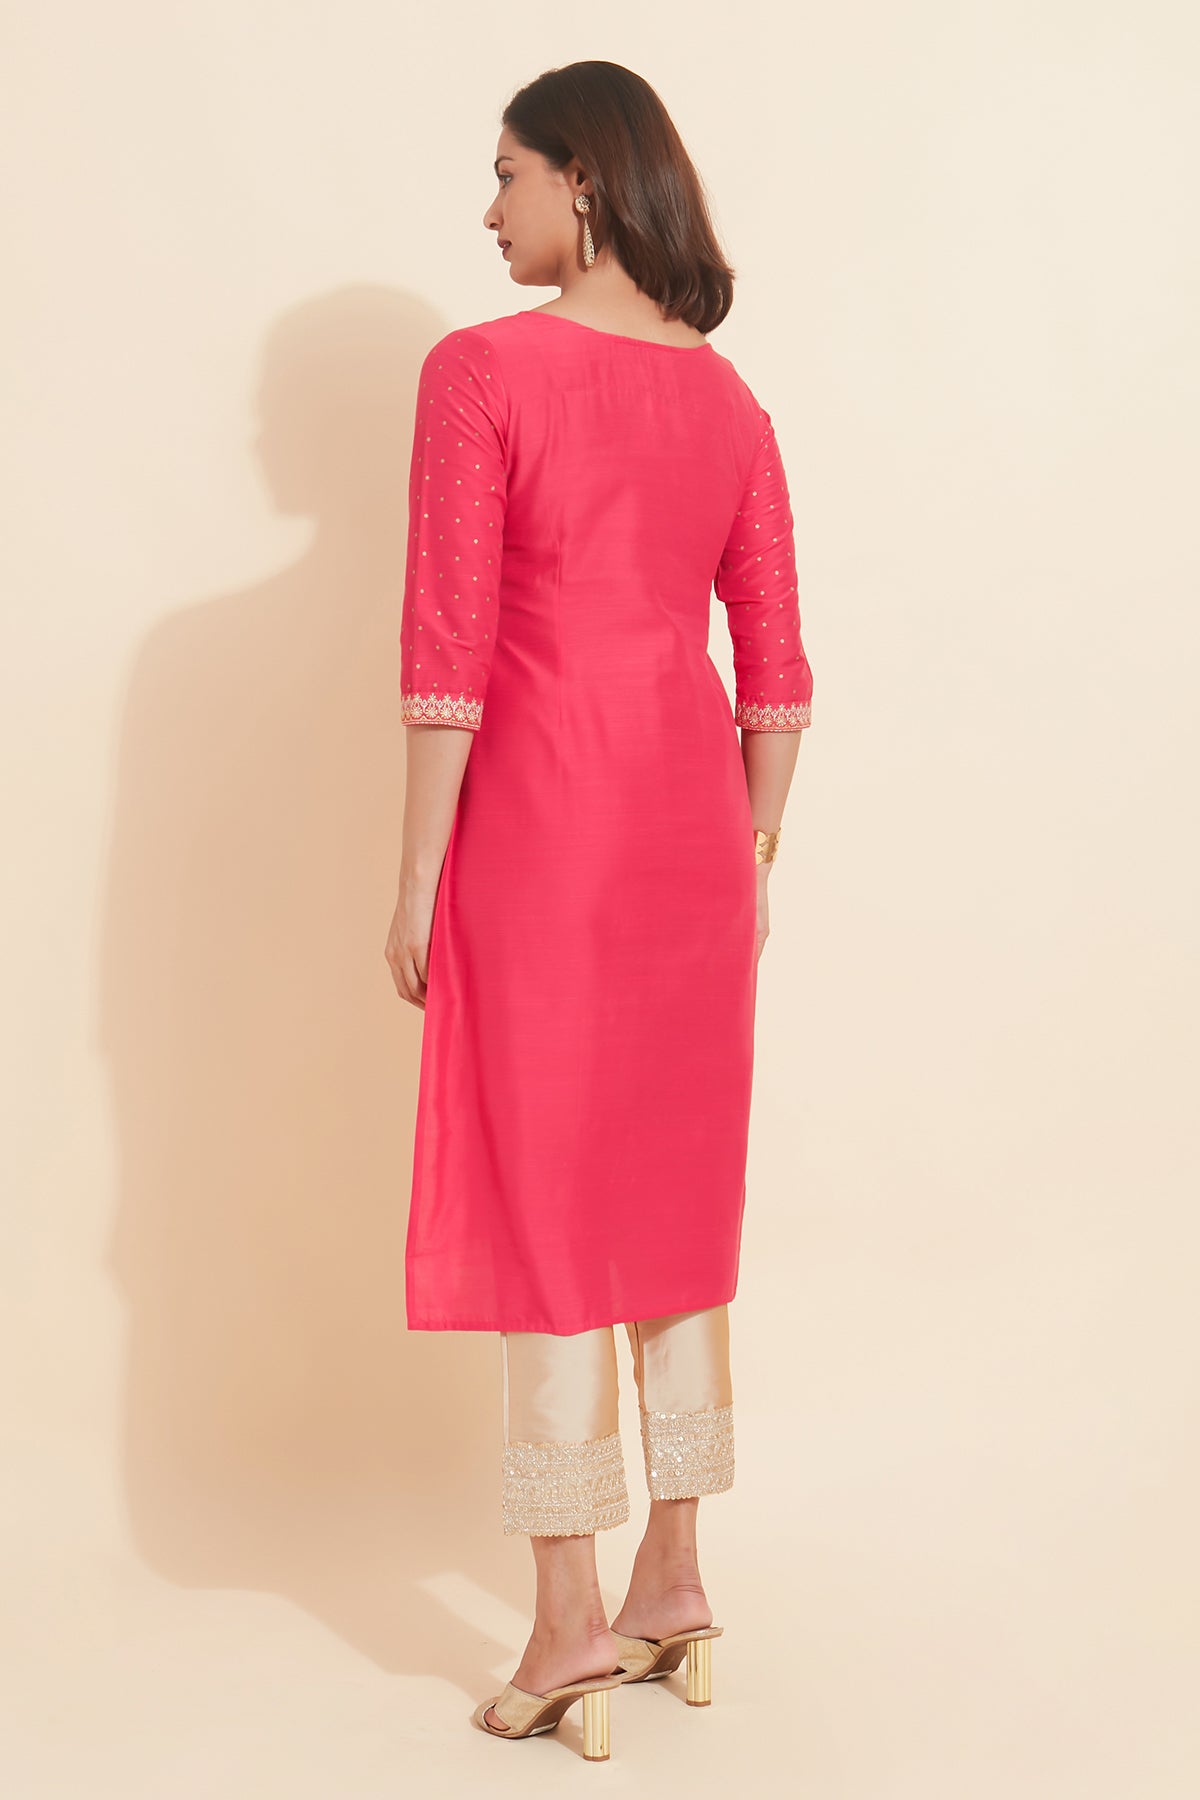 Jewel Embroidered Neckline With Floral Placement Kurta Pink